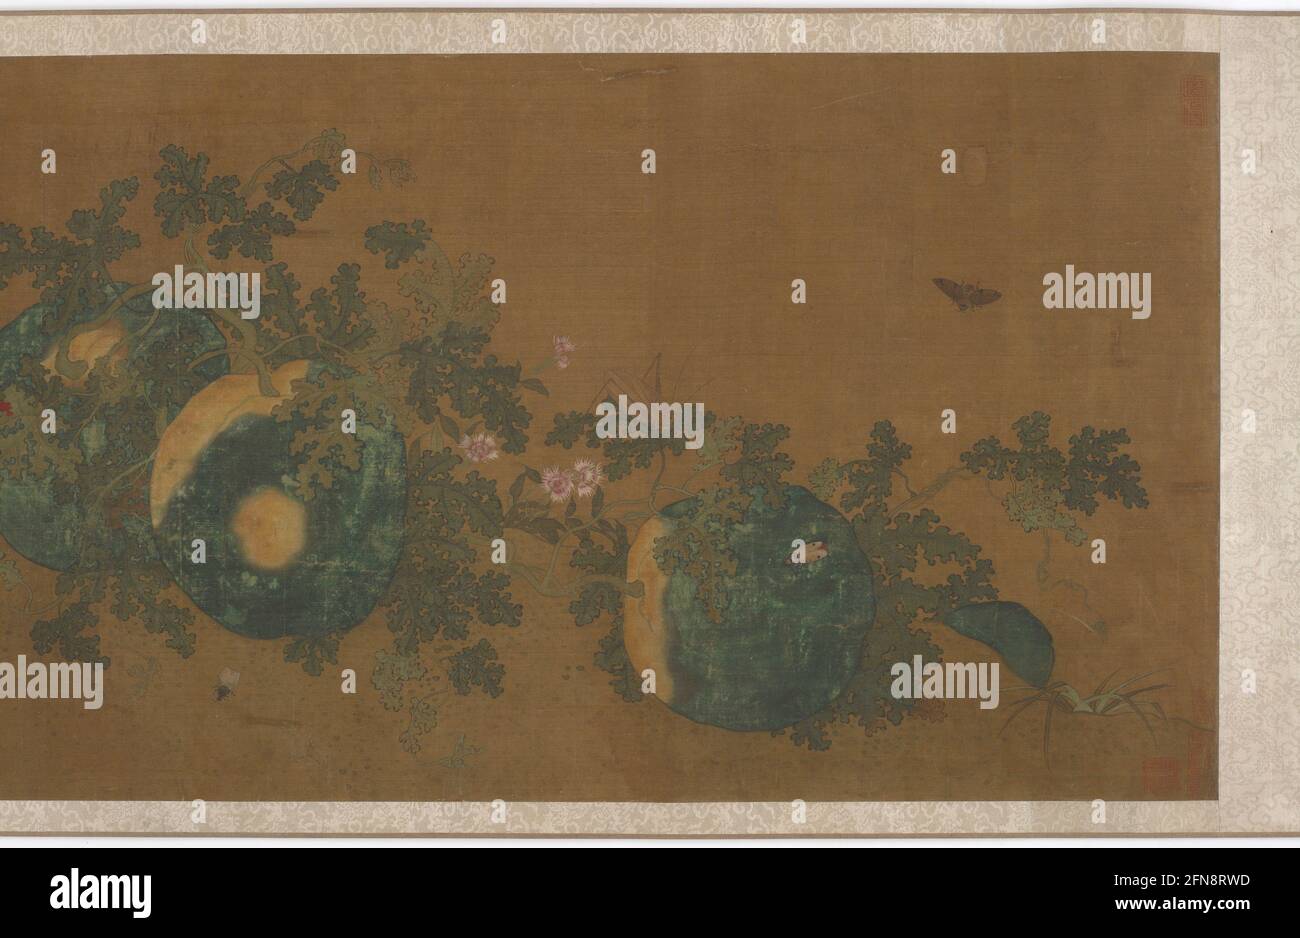 Melon vines, flowers, and insects, 1368-1644. Formerly attributed to Ma Yuan. Stock Photo